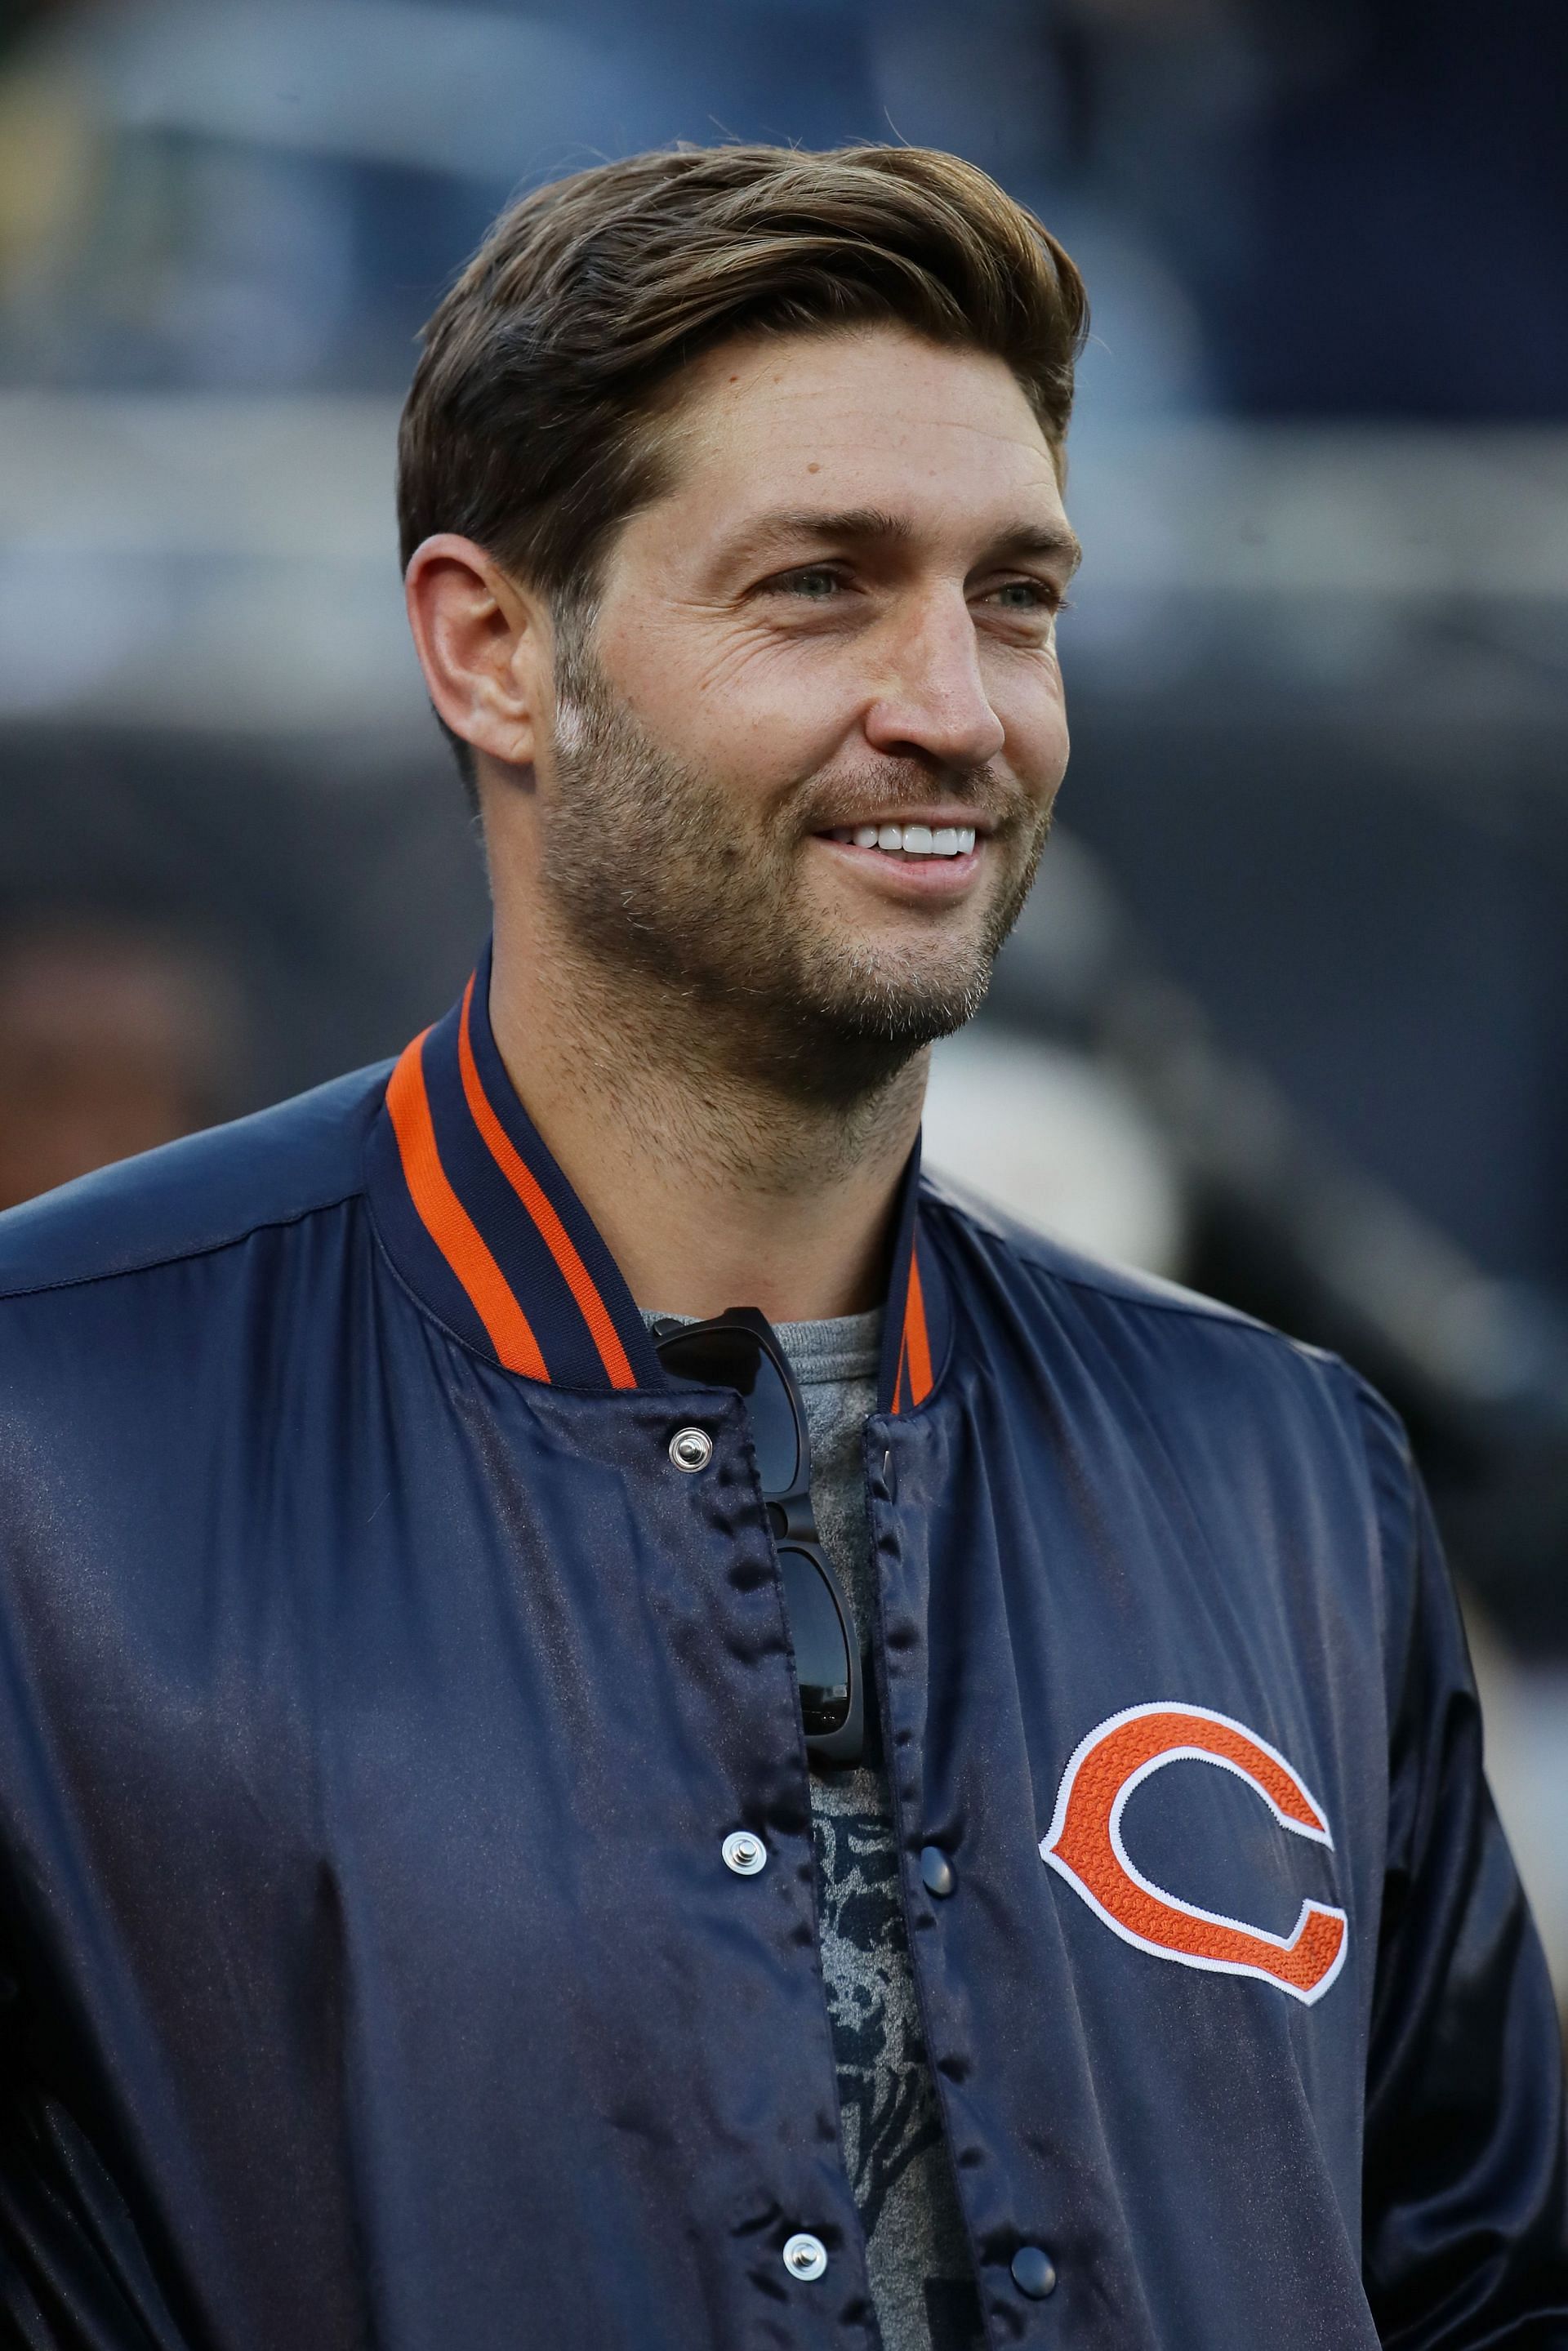 Jay Cutler at the Green Bay Packers v Chicago Bears game in NFL